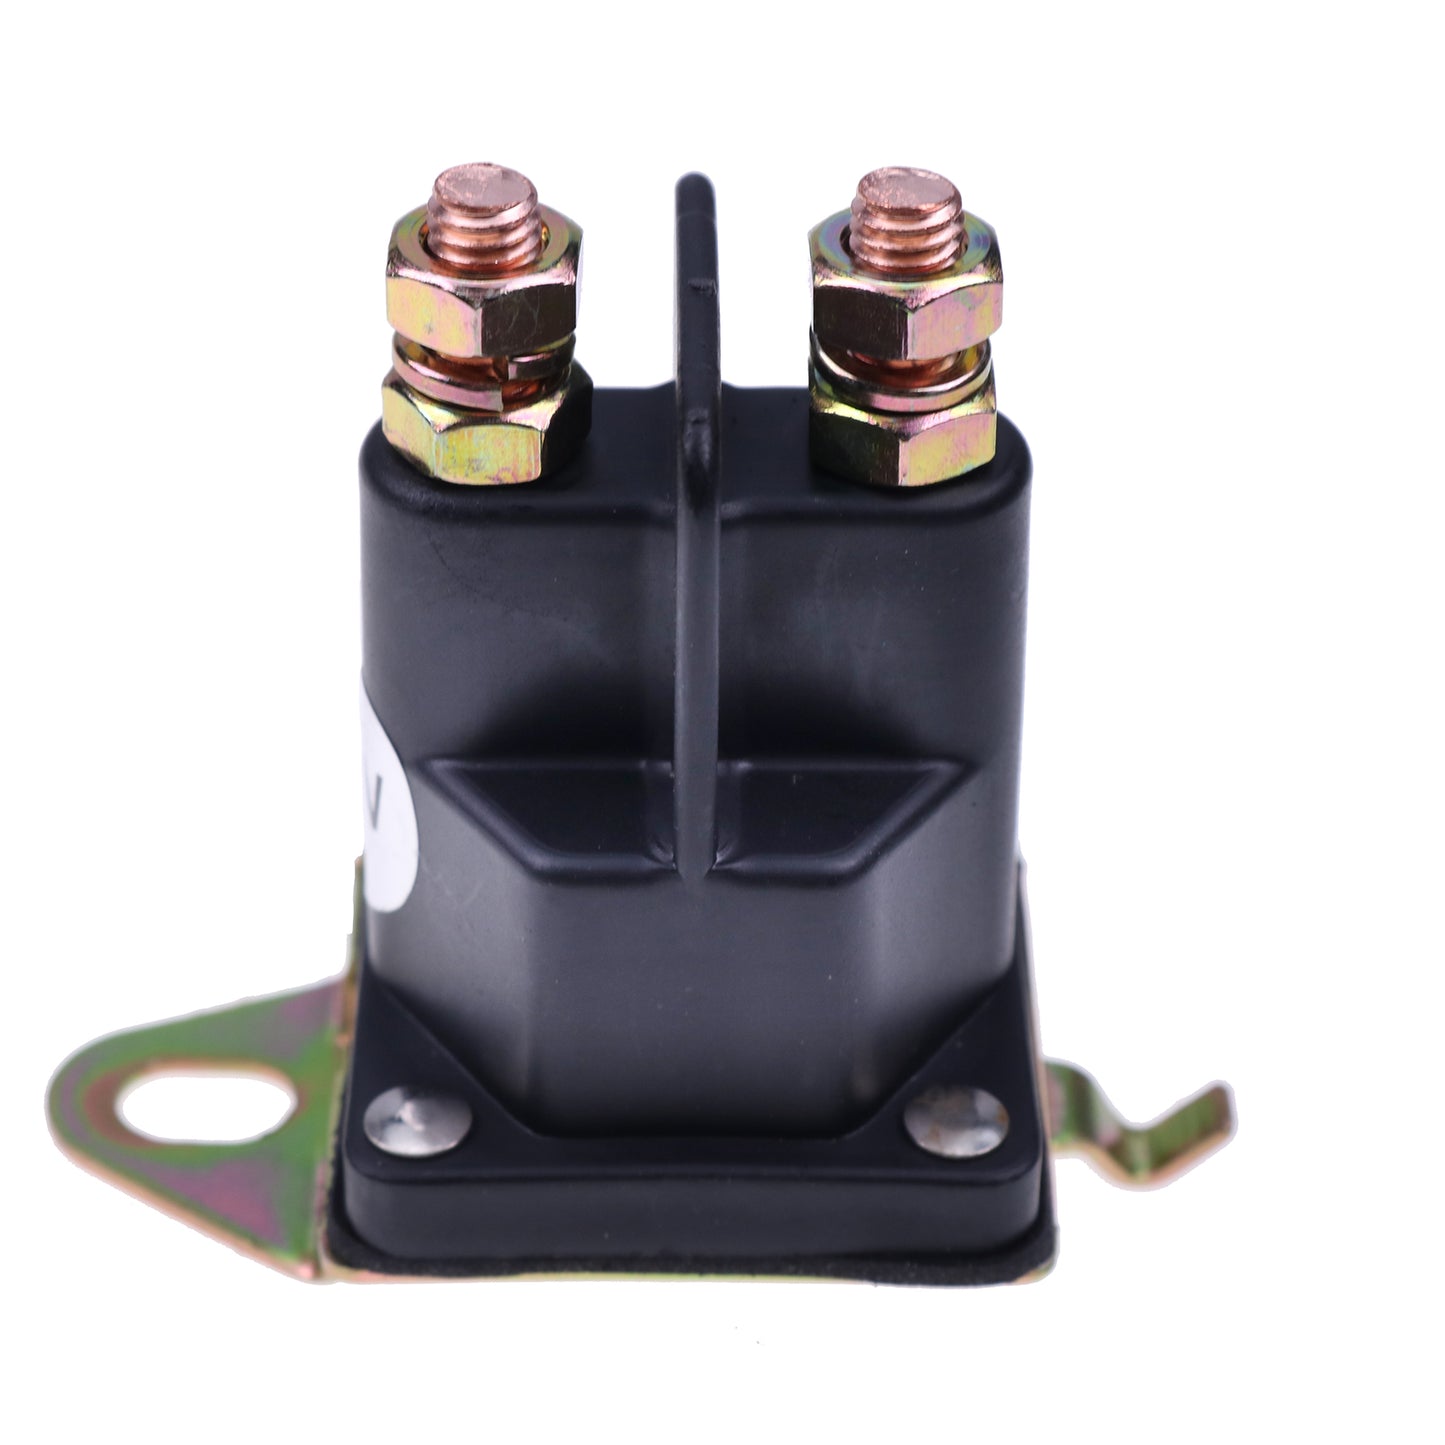 New Lawn Mower Solenoid Relay 762-1261-211-50 762-1261-211-51 Compatible with Trombetta Craftsman for Cub Cadet MTD RZT Z-Force AYP Husqvarna